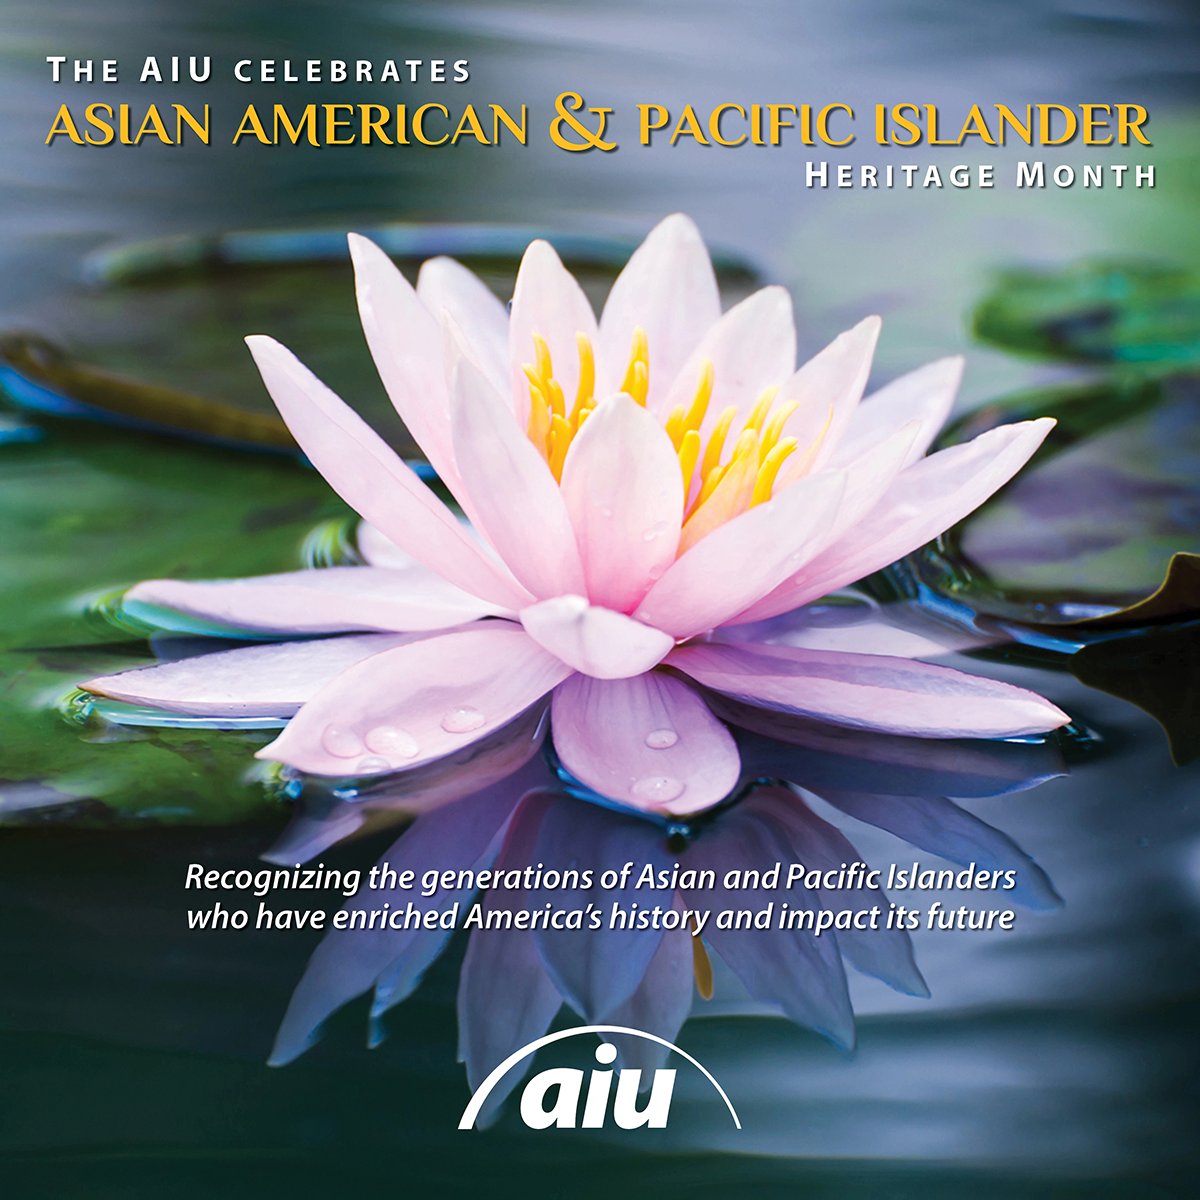 The AIU celebrates and recognizes the generations of Asian and Pacific Islanders who have enriched America's history and impact its future.